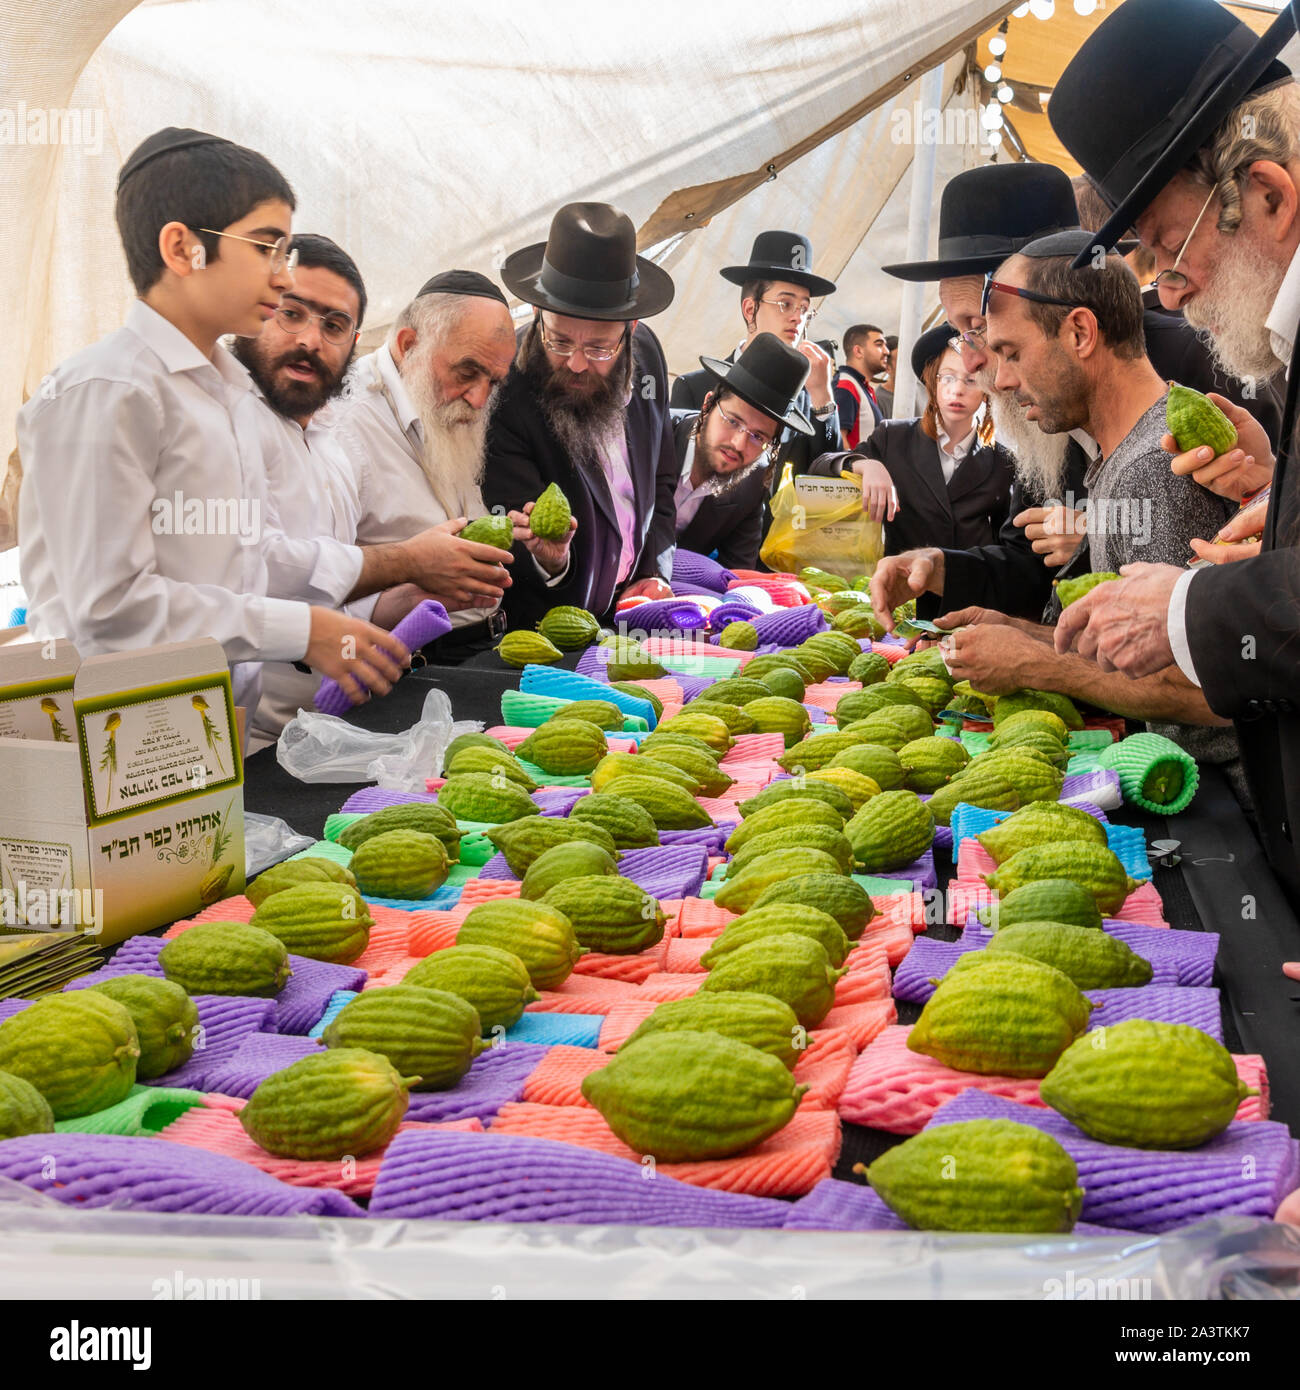 Jerusalem, ISRAEL / 10 OCT 2019: Unidentified shoppers examine citrons, the centerpiece fruit of the Four Species of the Sukkot Festival, in Jerusalem Stock Photo